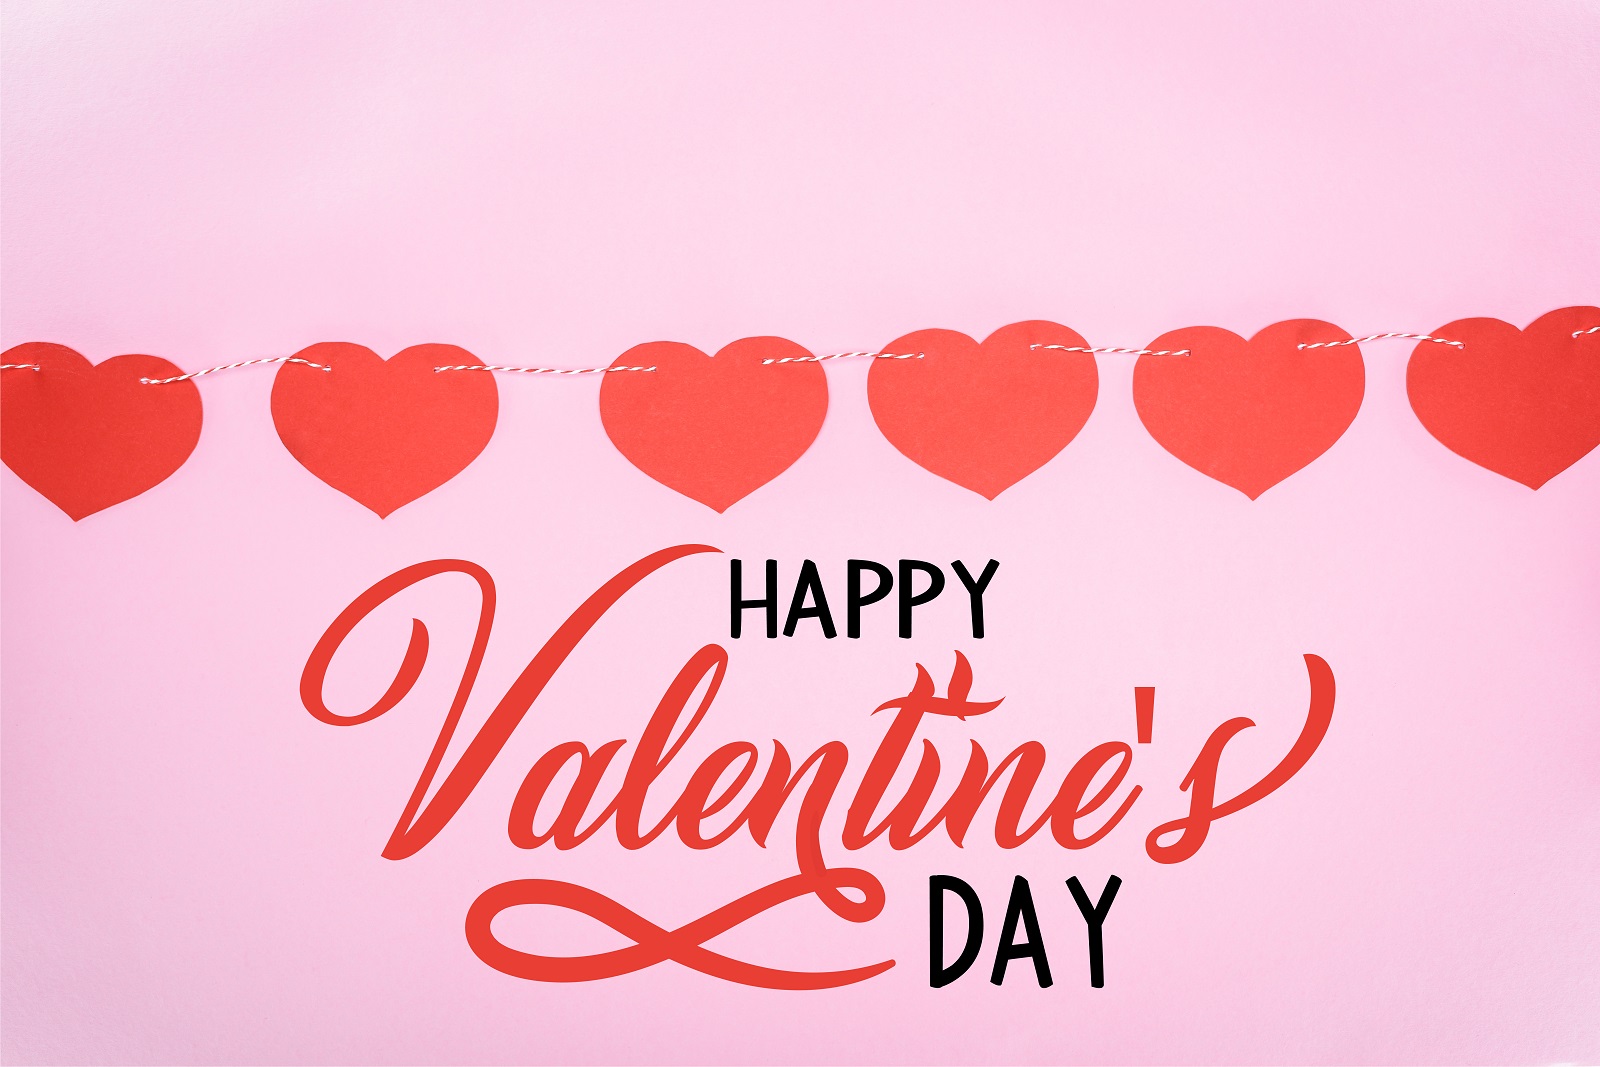 A Smile That Shines: Tips for a Healthy Valentine's Day